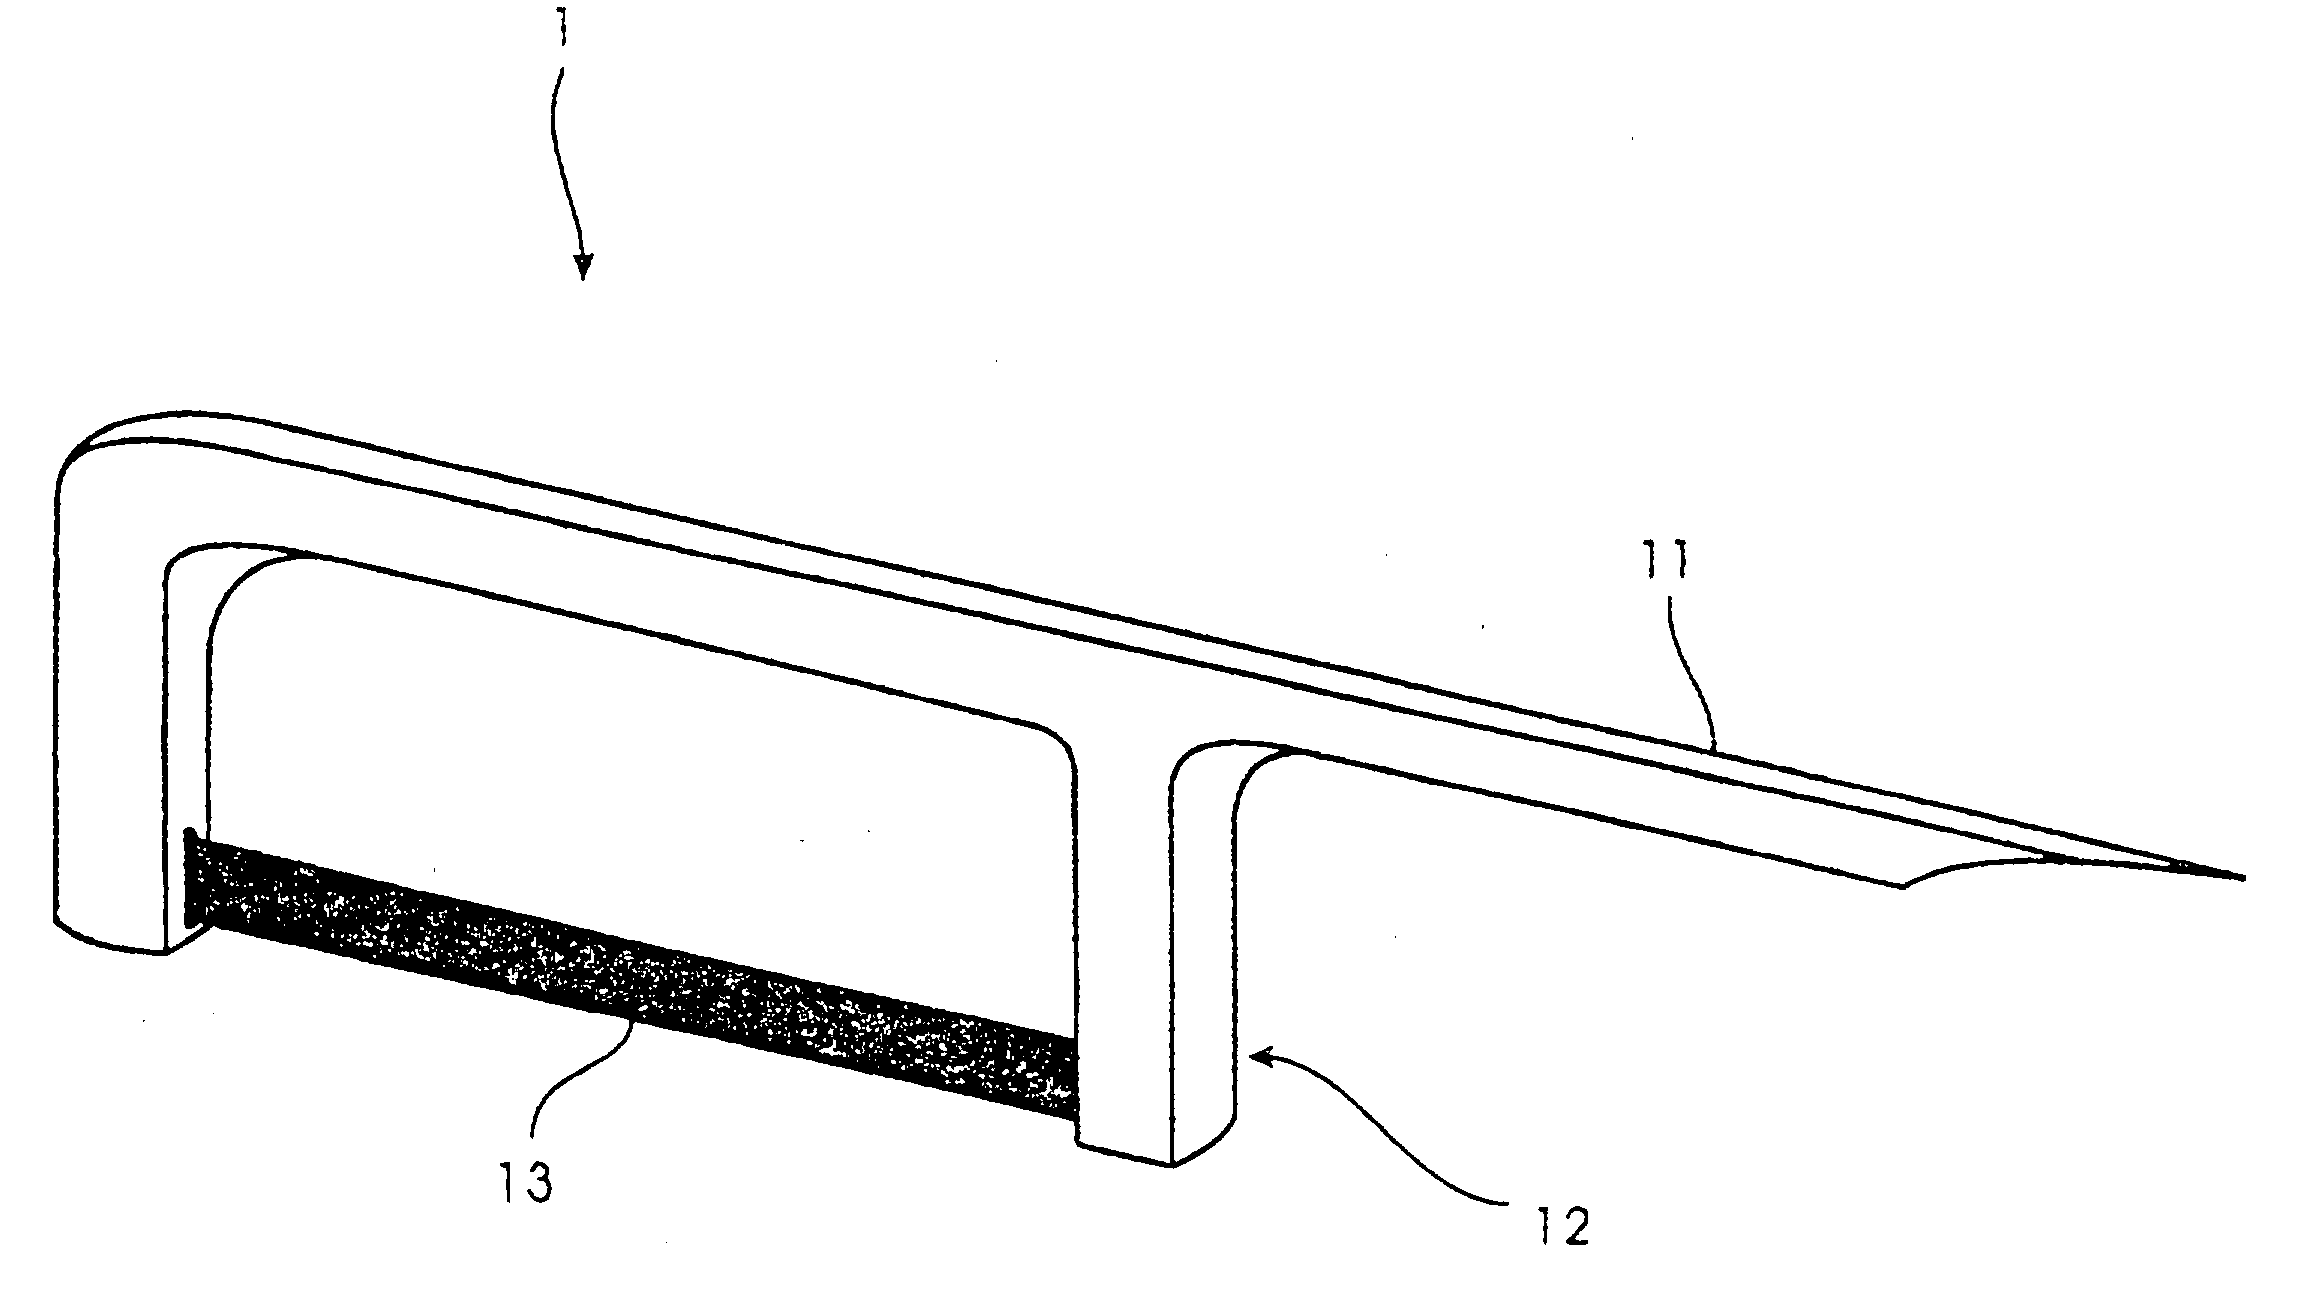 Disposable dental floss holder and multi-function thereof